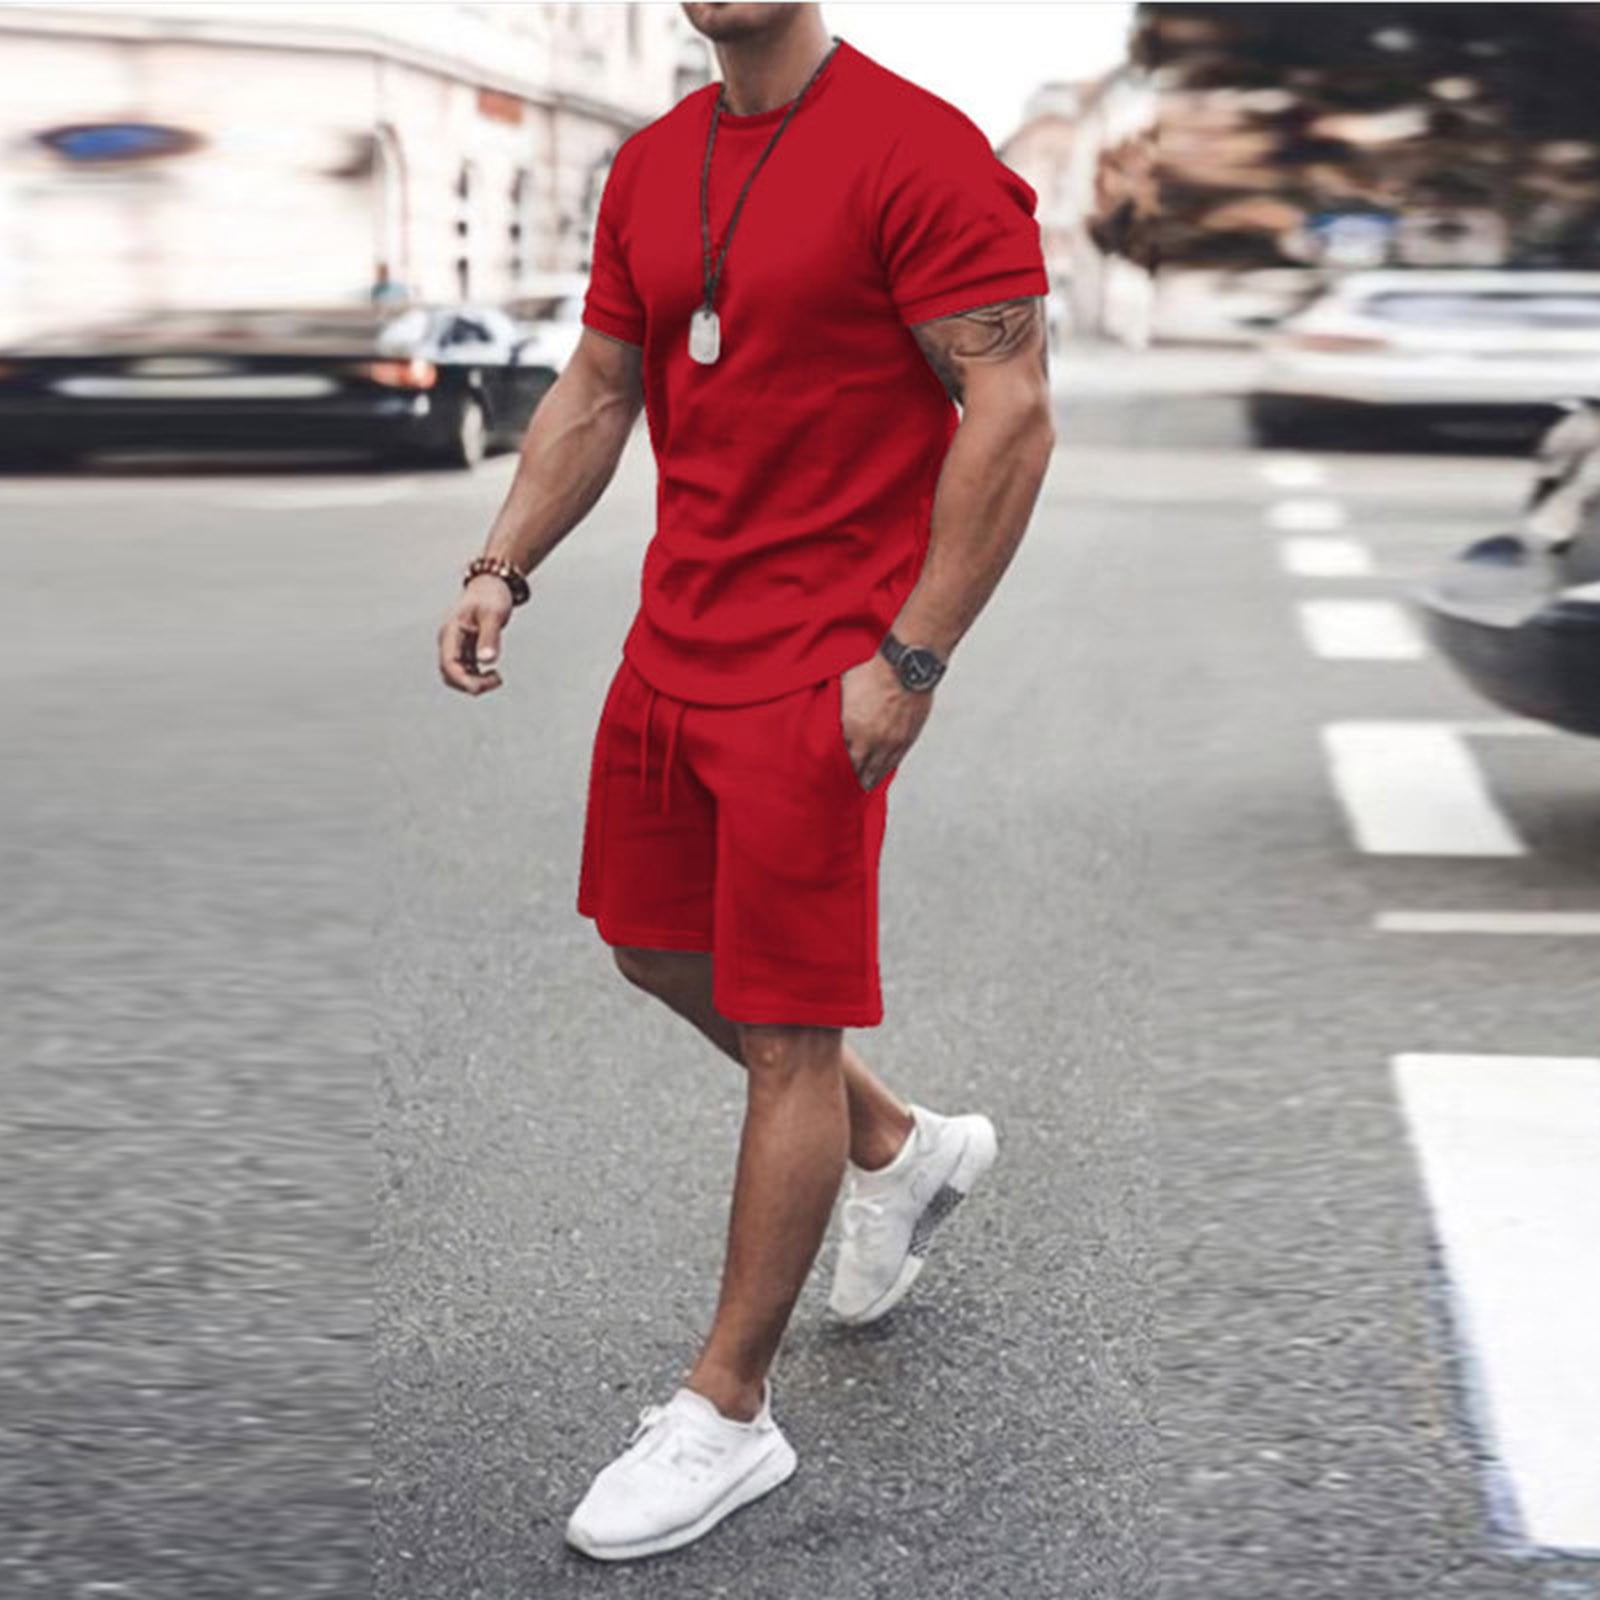 Men's Short Sleeve T-Shirt and Shorts Set Sport Casual Crew Neck Muscle  Sportswear 2 Piece Tracksuit Summer Outfits